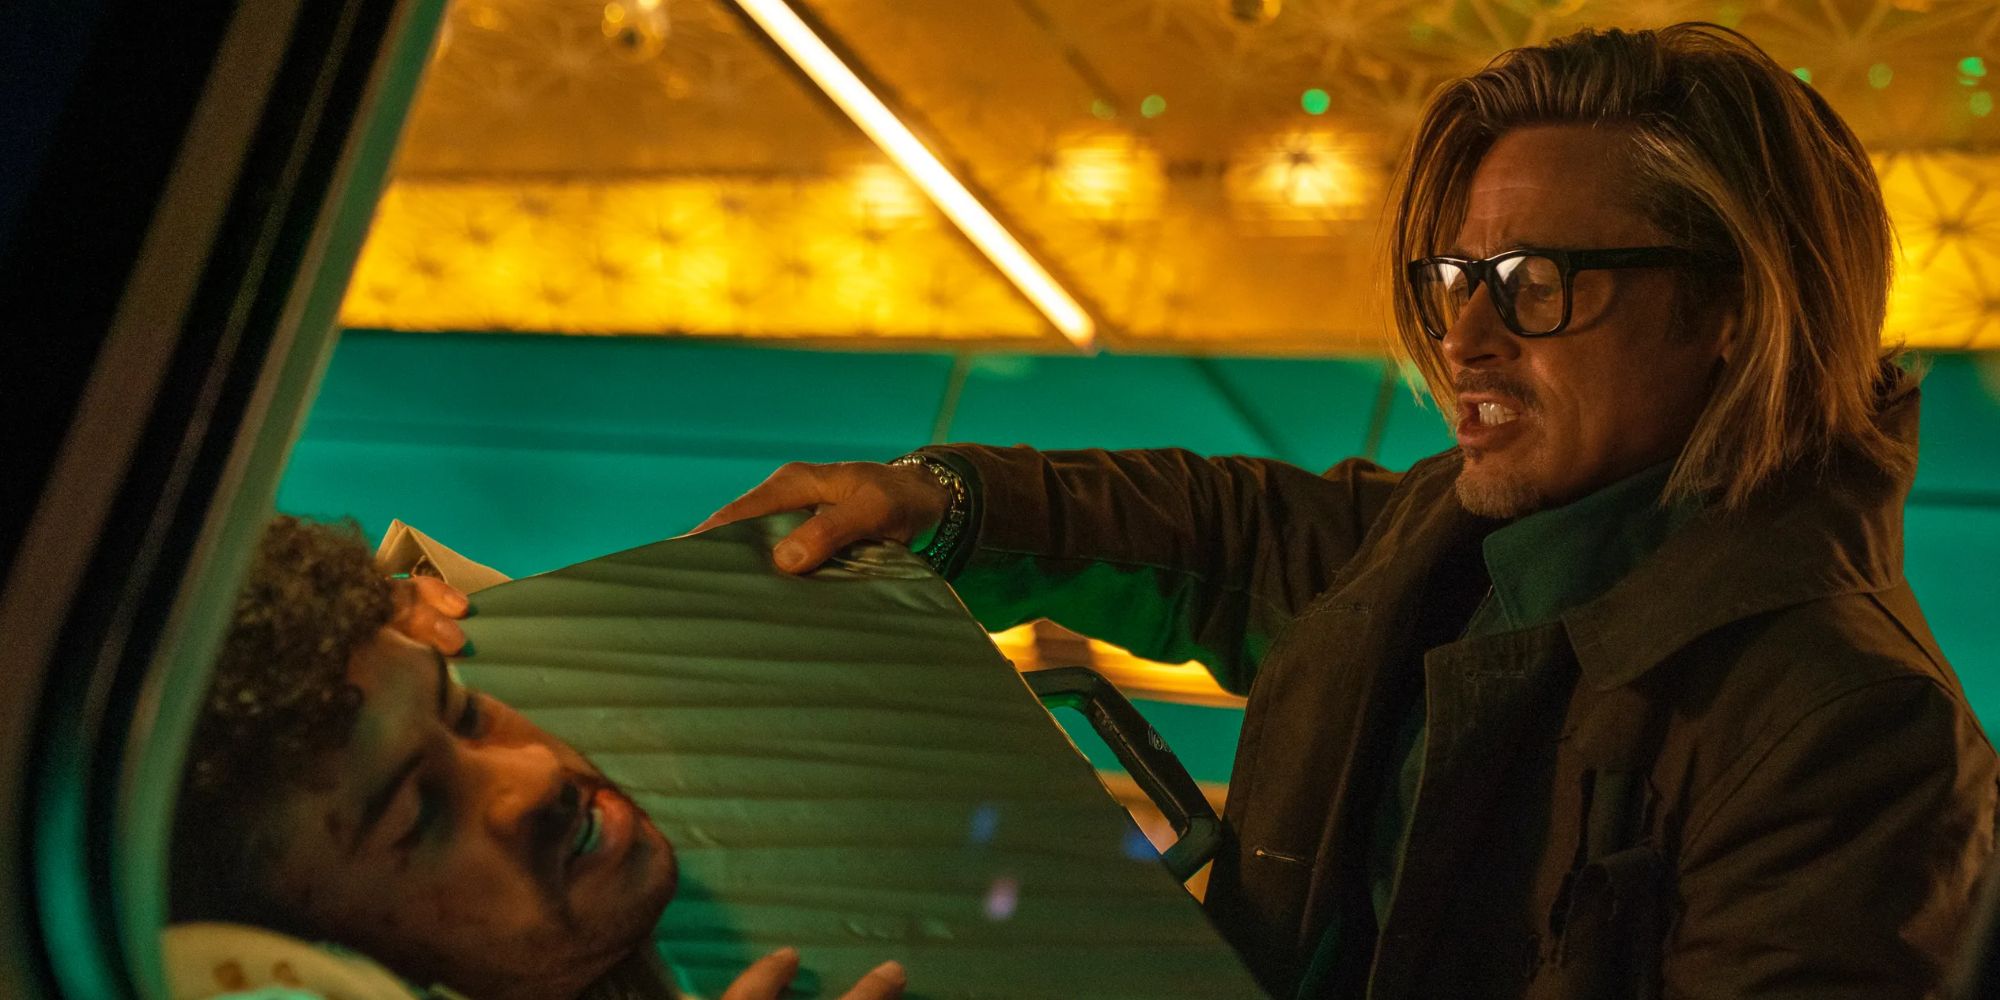 Are any of the John Wick trilogy movies on Netflix? - Quora